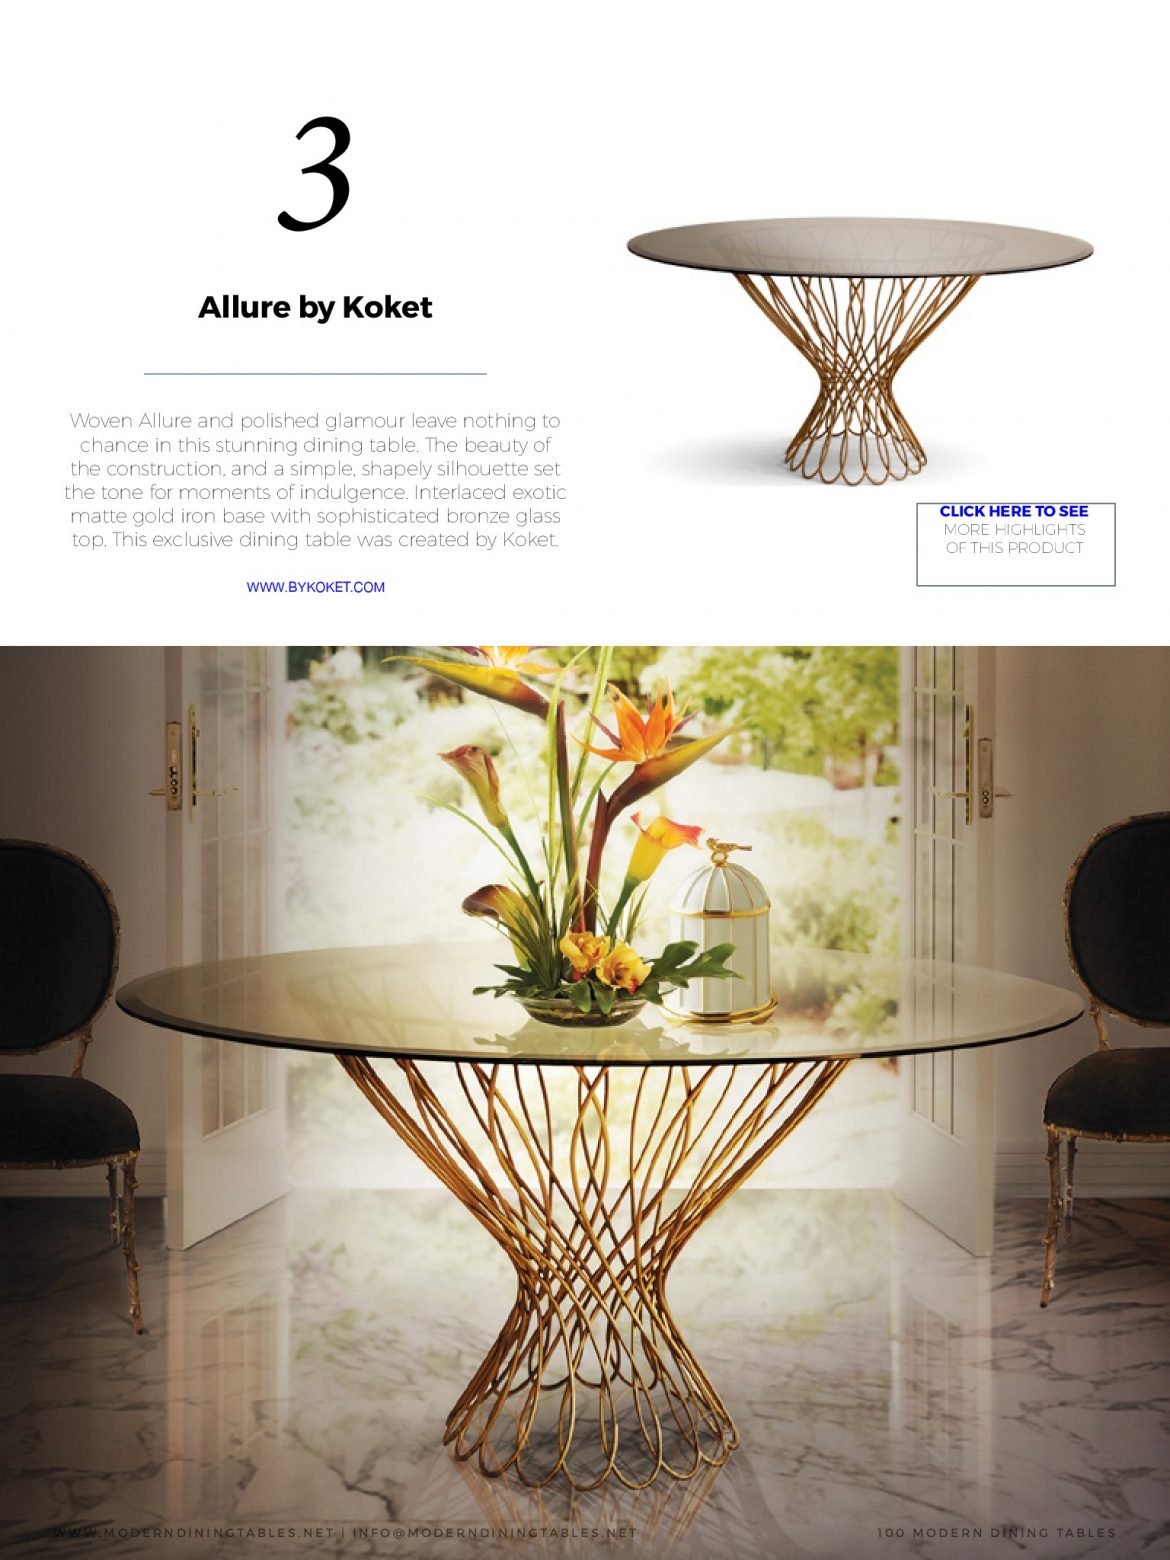 60 Modern Dining Tables for the Perfect Dining Room modern dining tables 60 Modern Dining Tables for the Perfect Dining Room 60 Modern Dining Tables for a Luxurious Meal 4